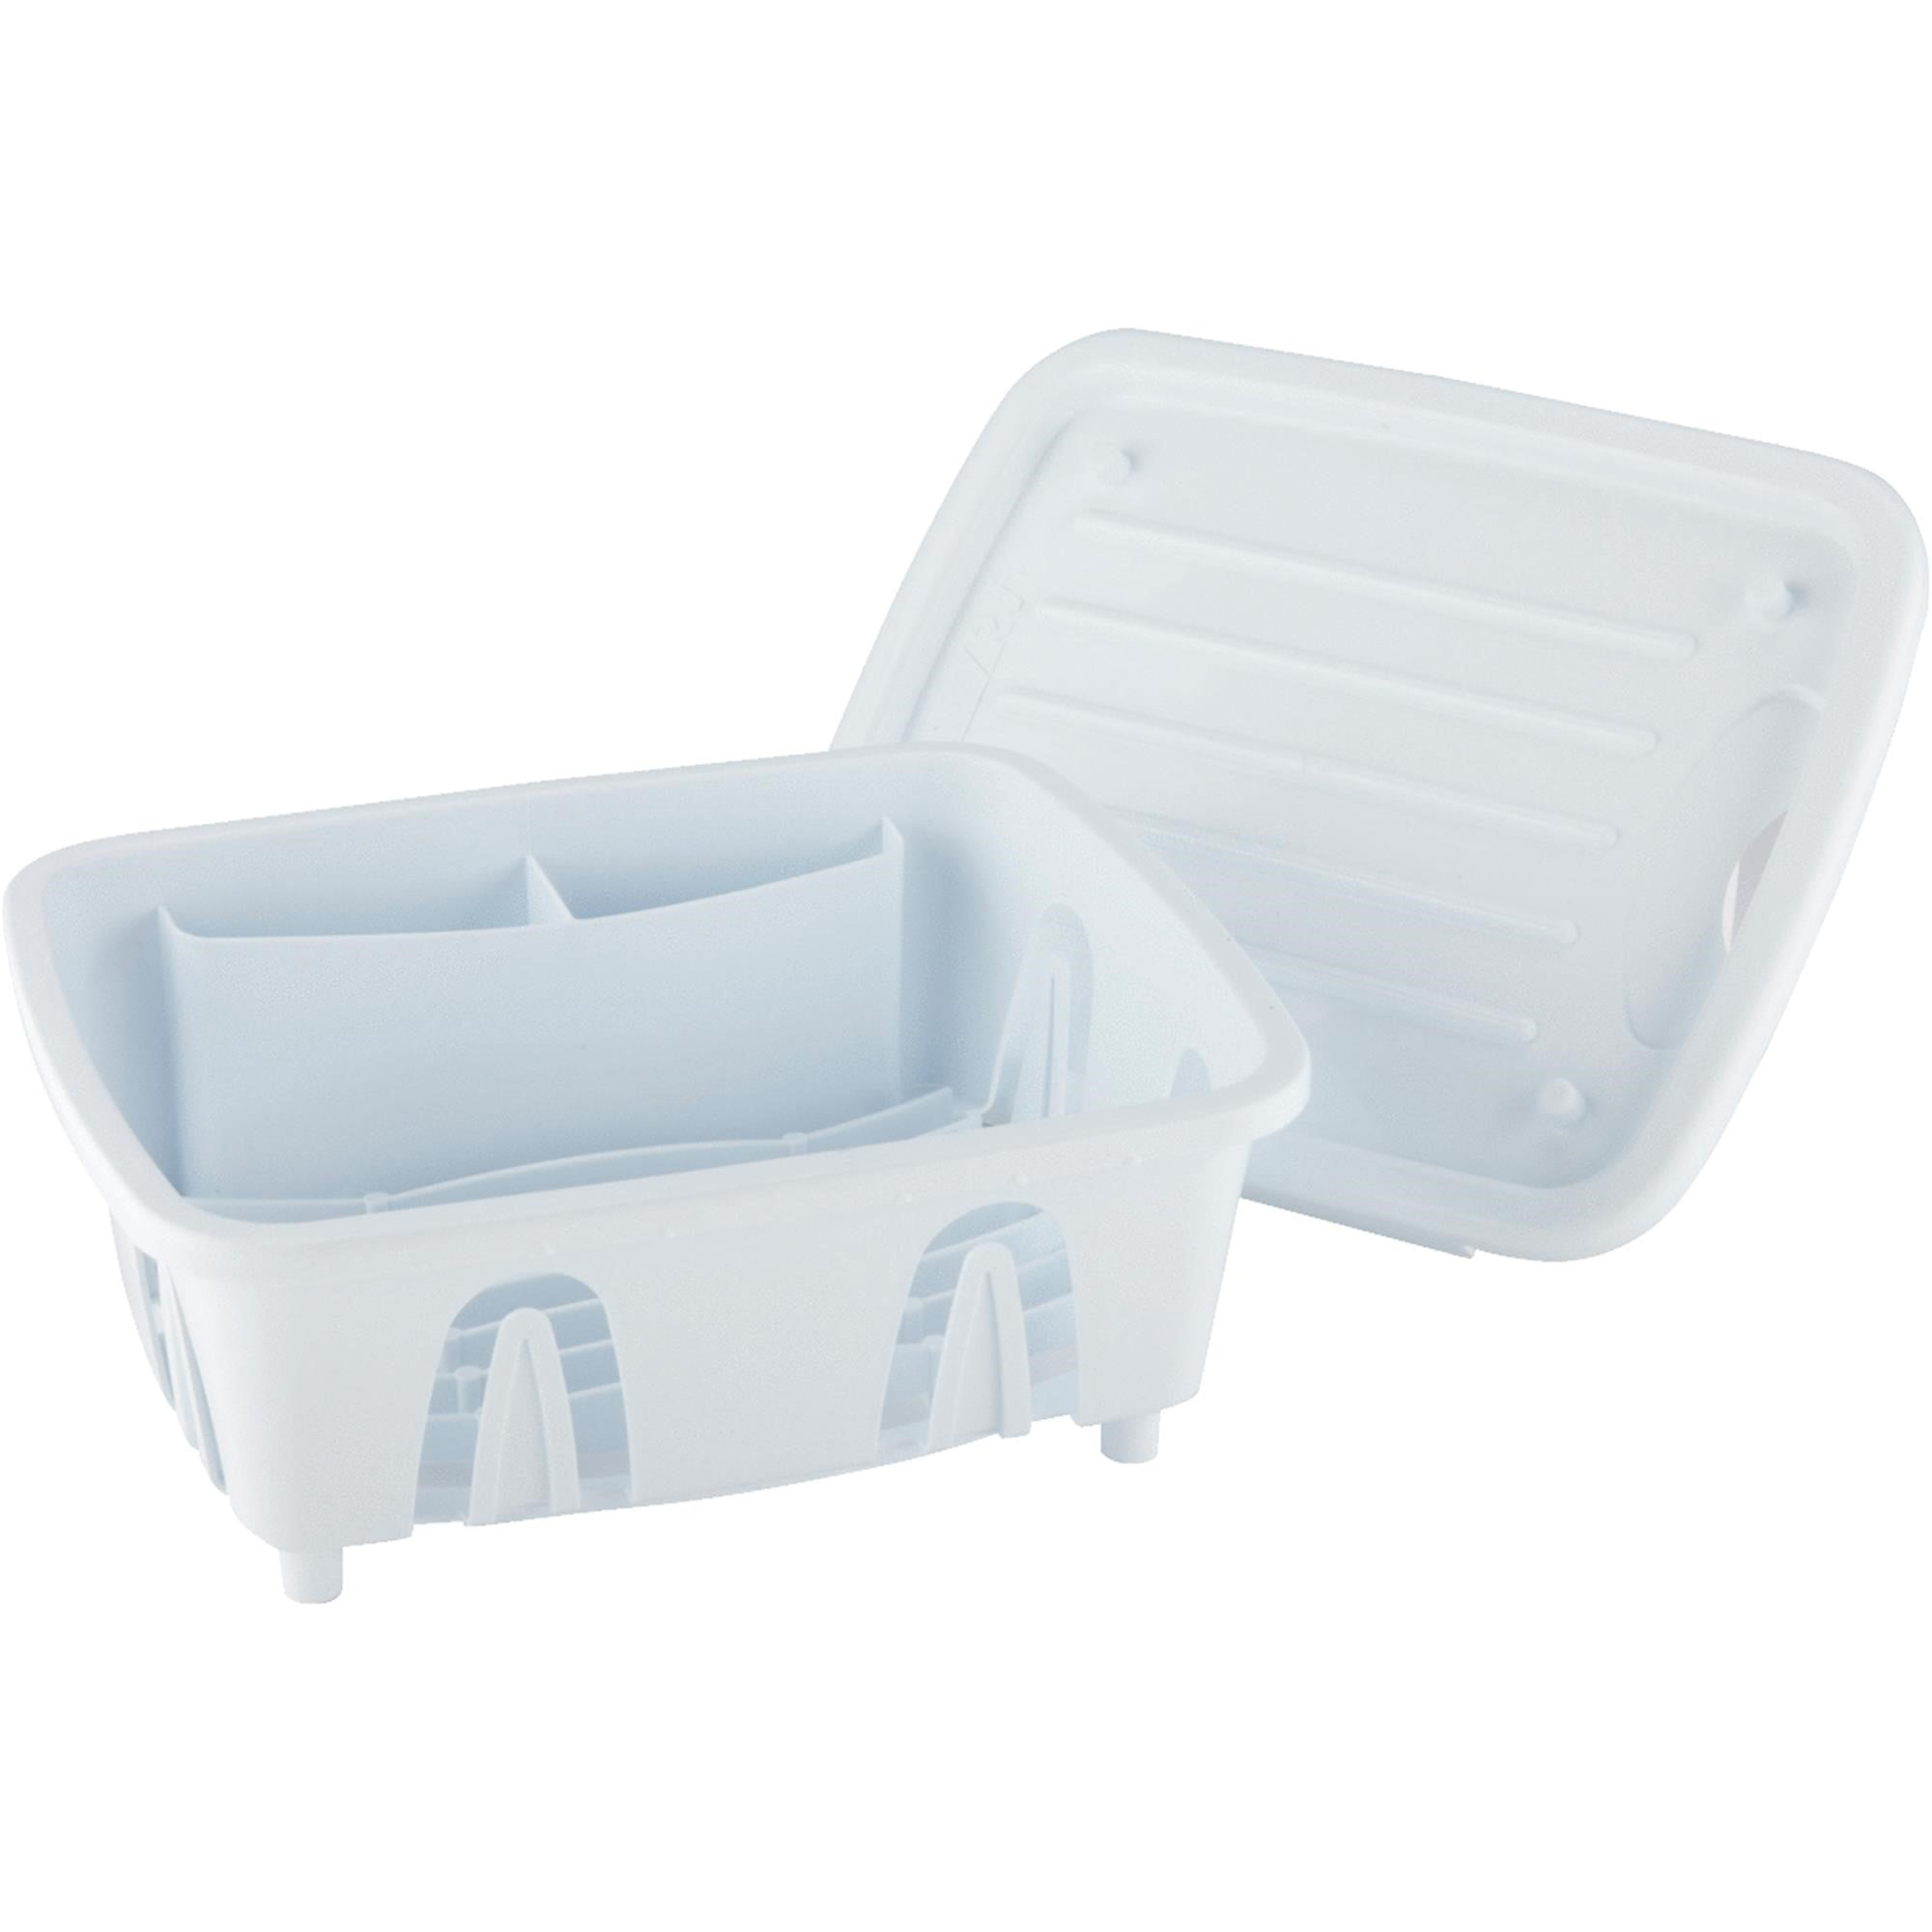 Marine Sinks Durable Mini Dish Drainer Rack and Tray Perfect for RV Sinks 